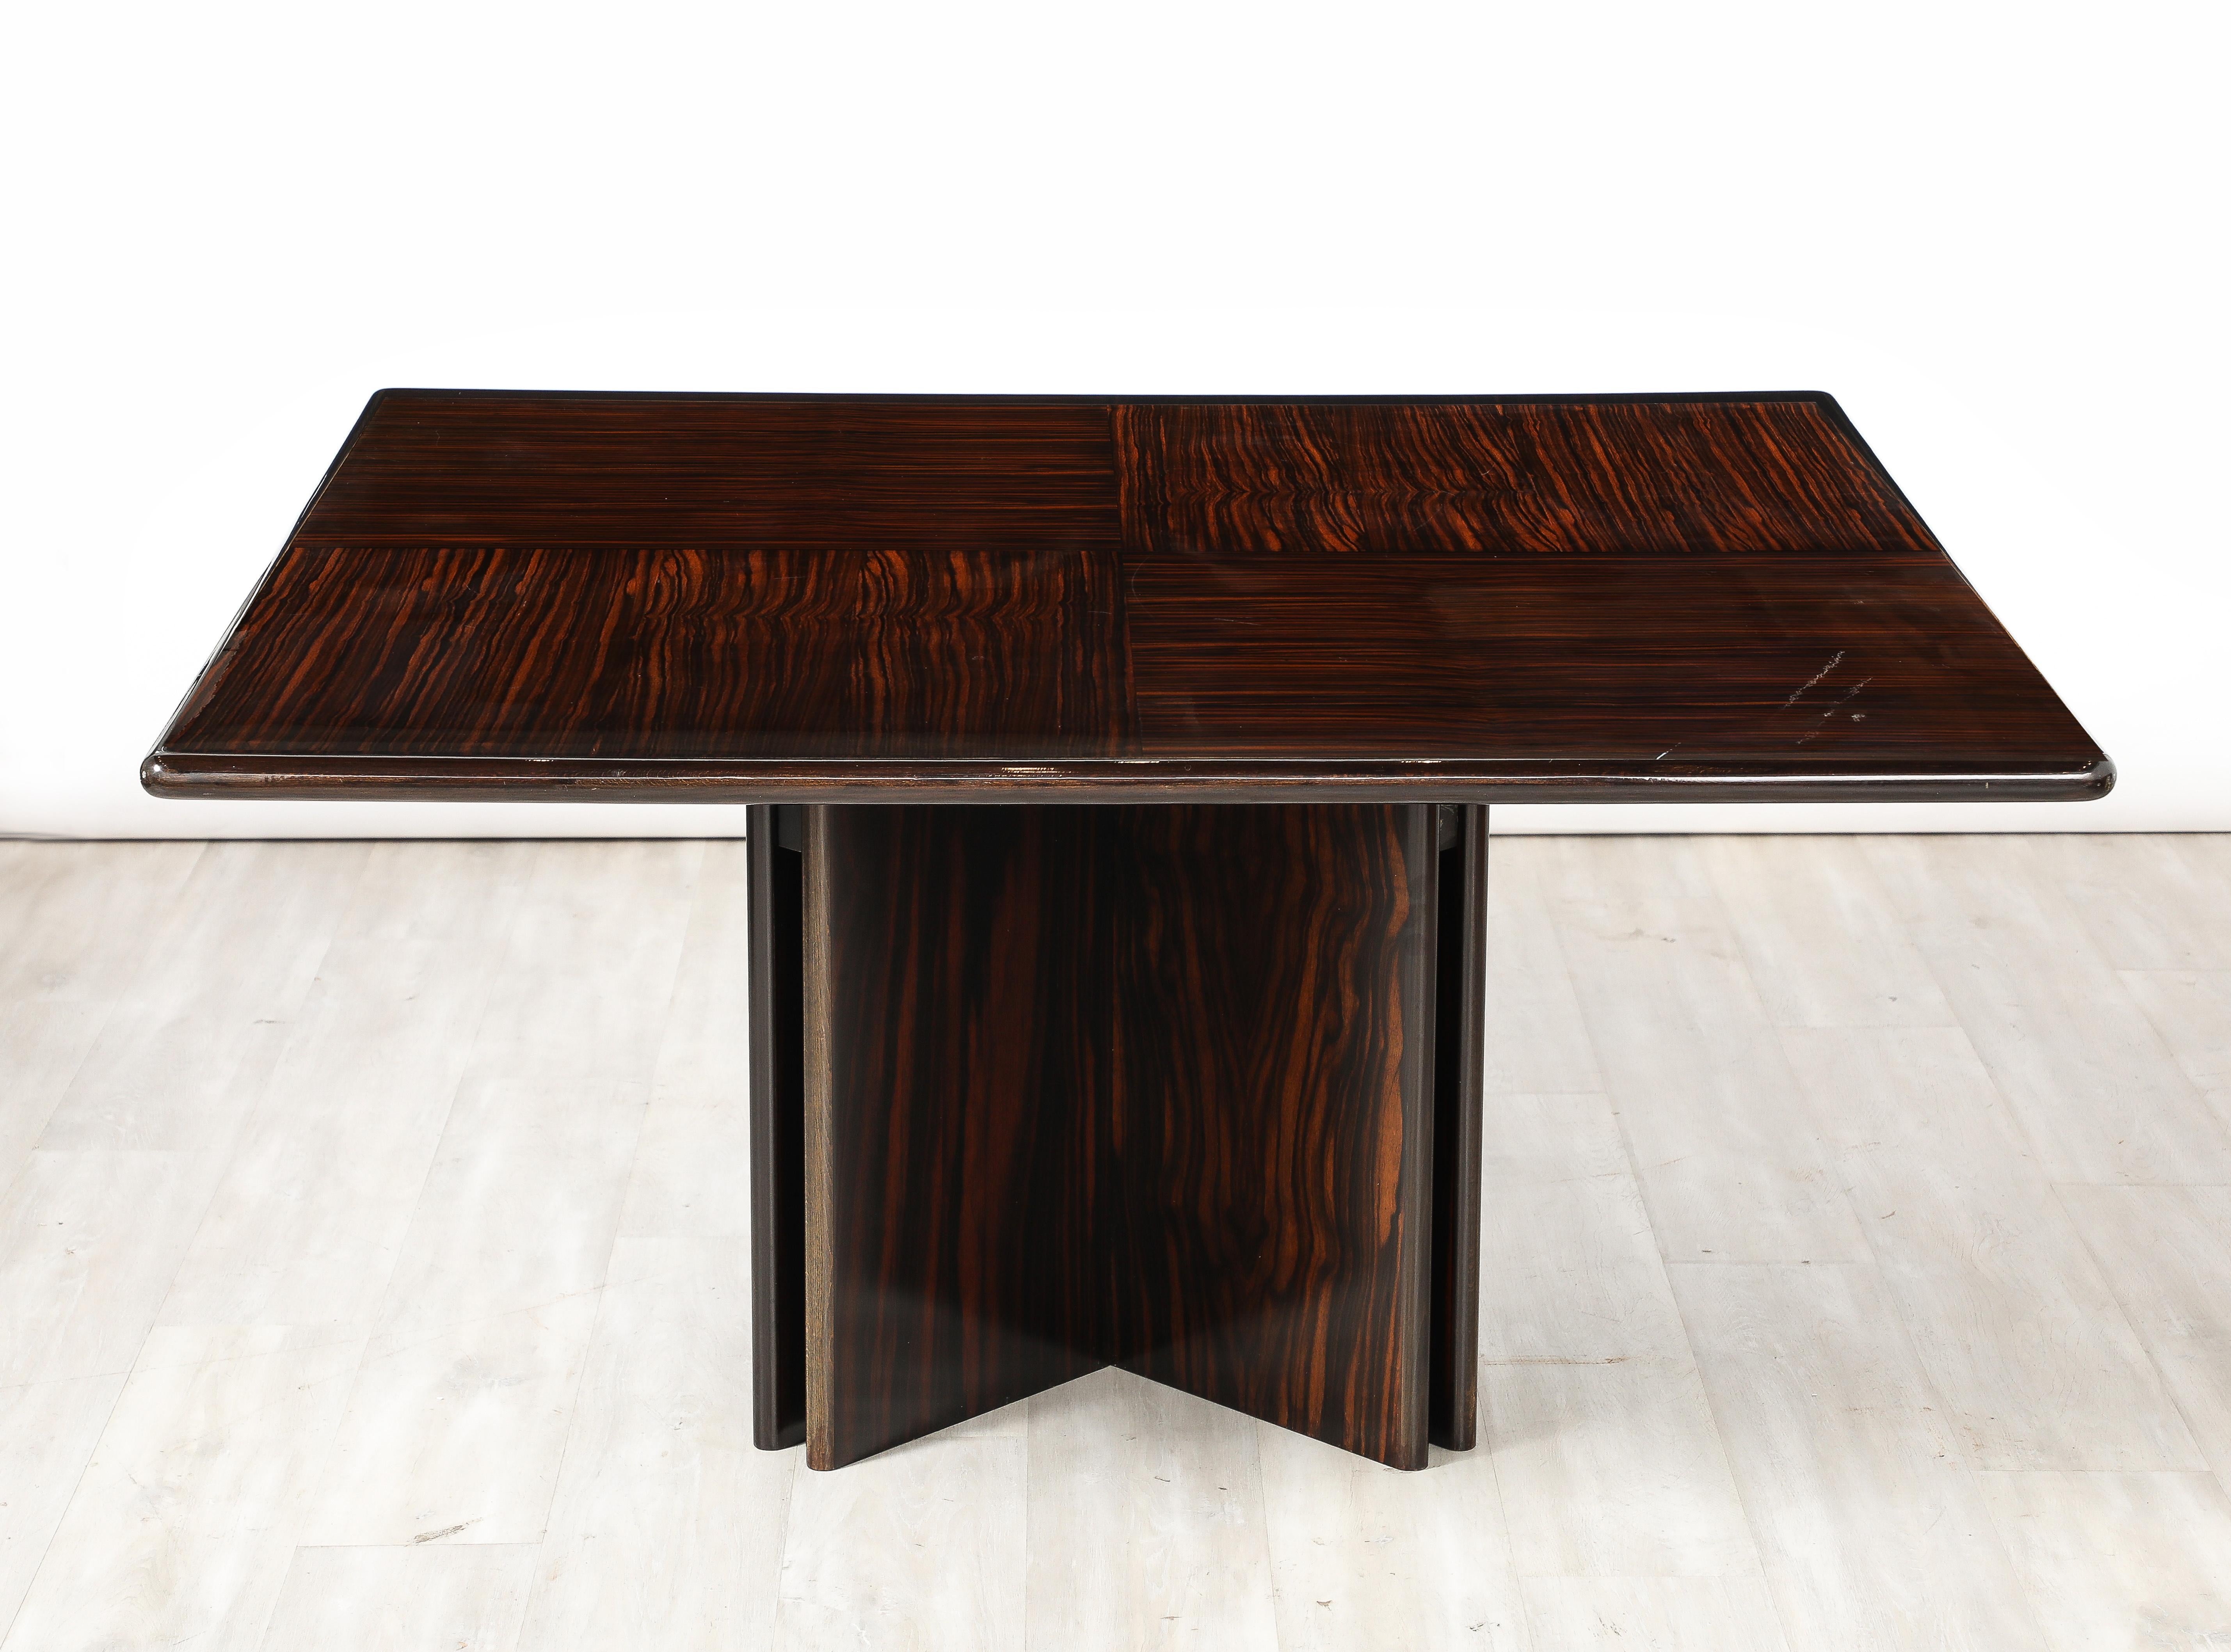 Italian Modernist Macassar Ebony Square Dining Table, Italy, circa 1960  In Good Condition For Sale In New York, NY